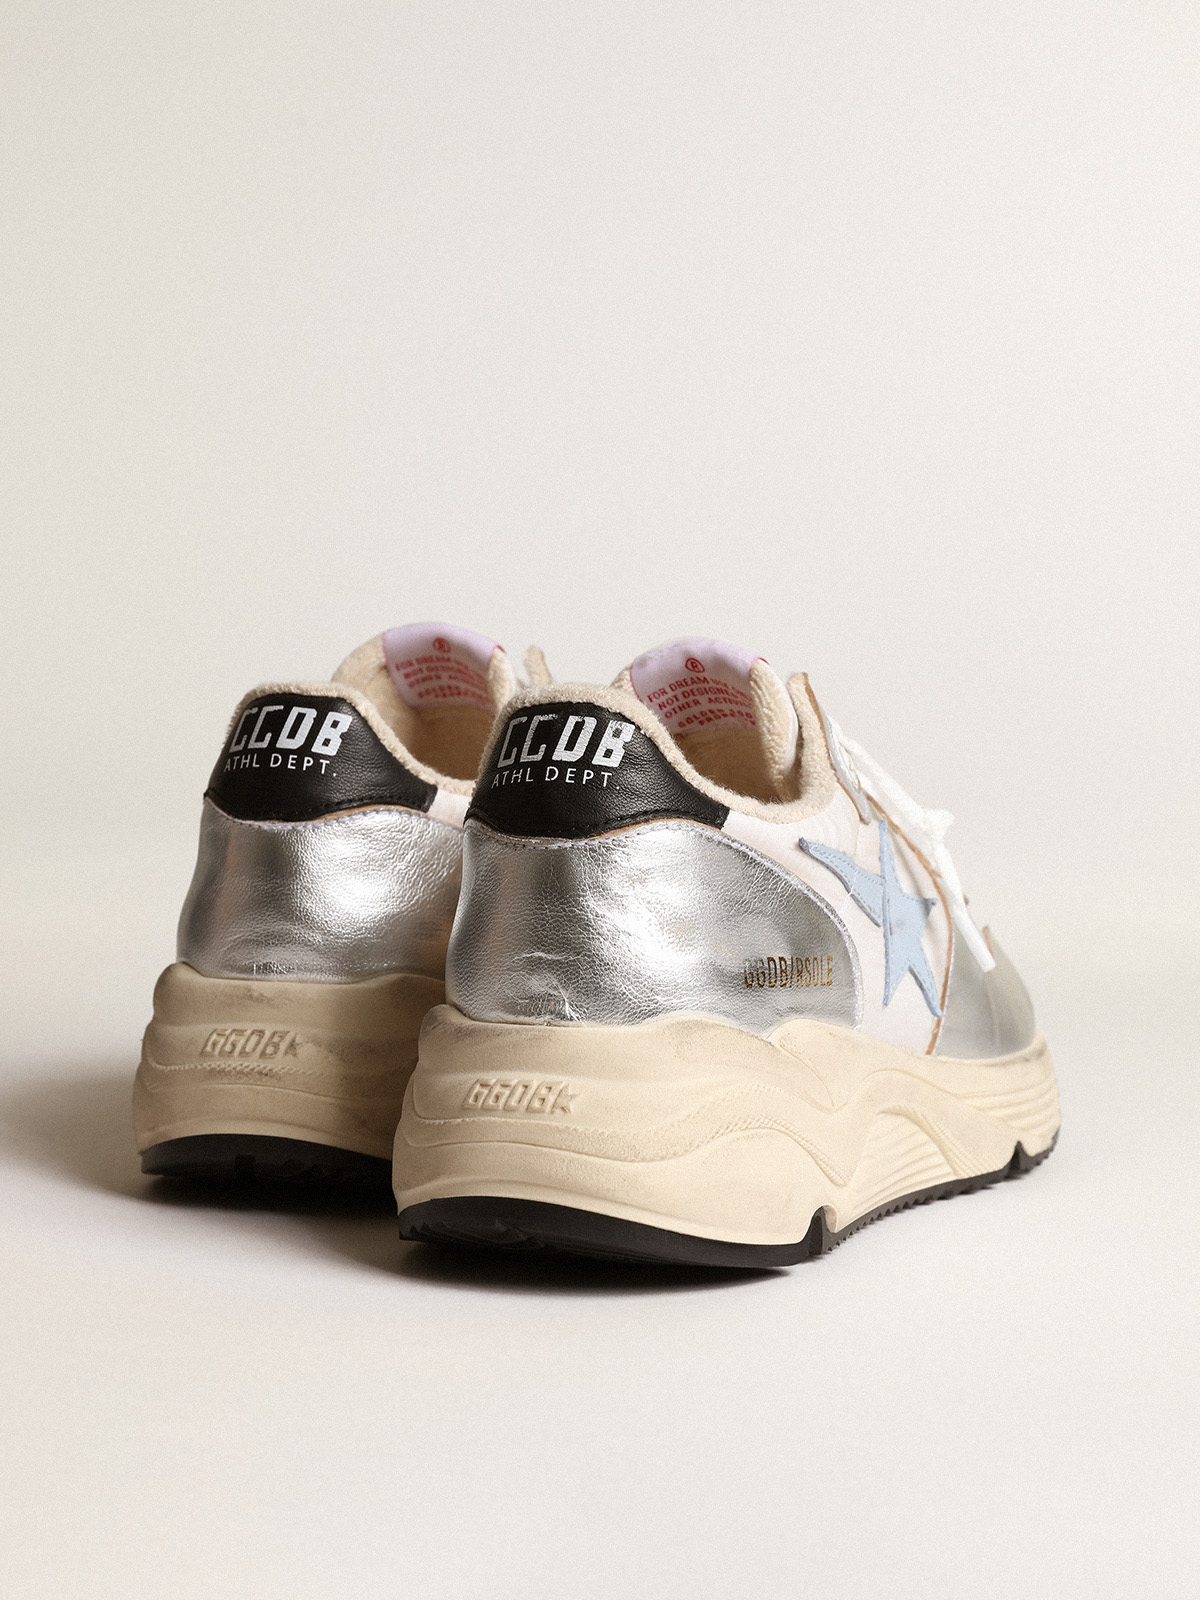 Running Sole in nylon and silver metallic leather with light blue star |  Golden Goose